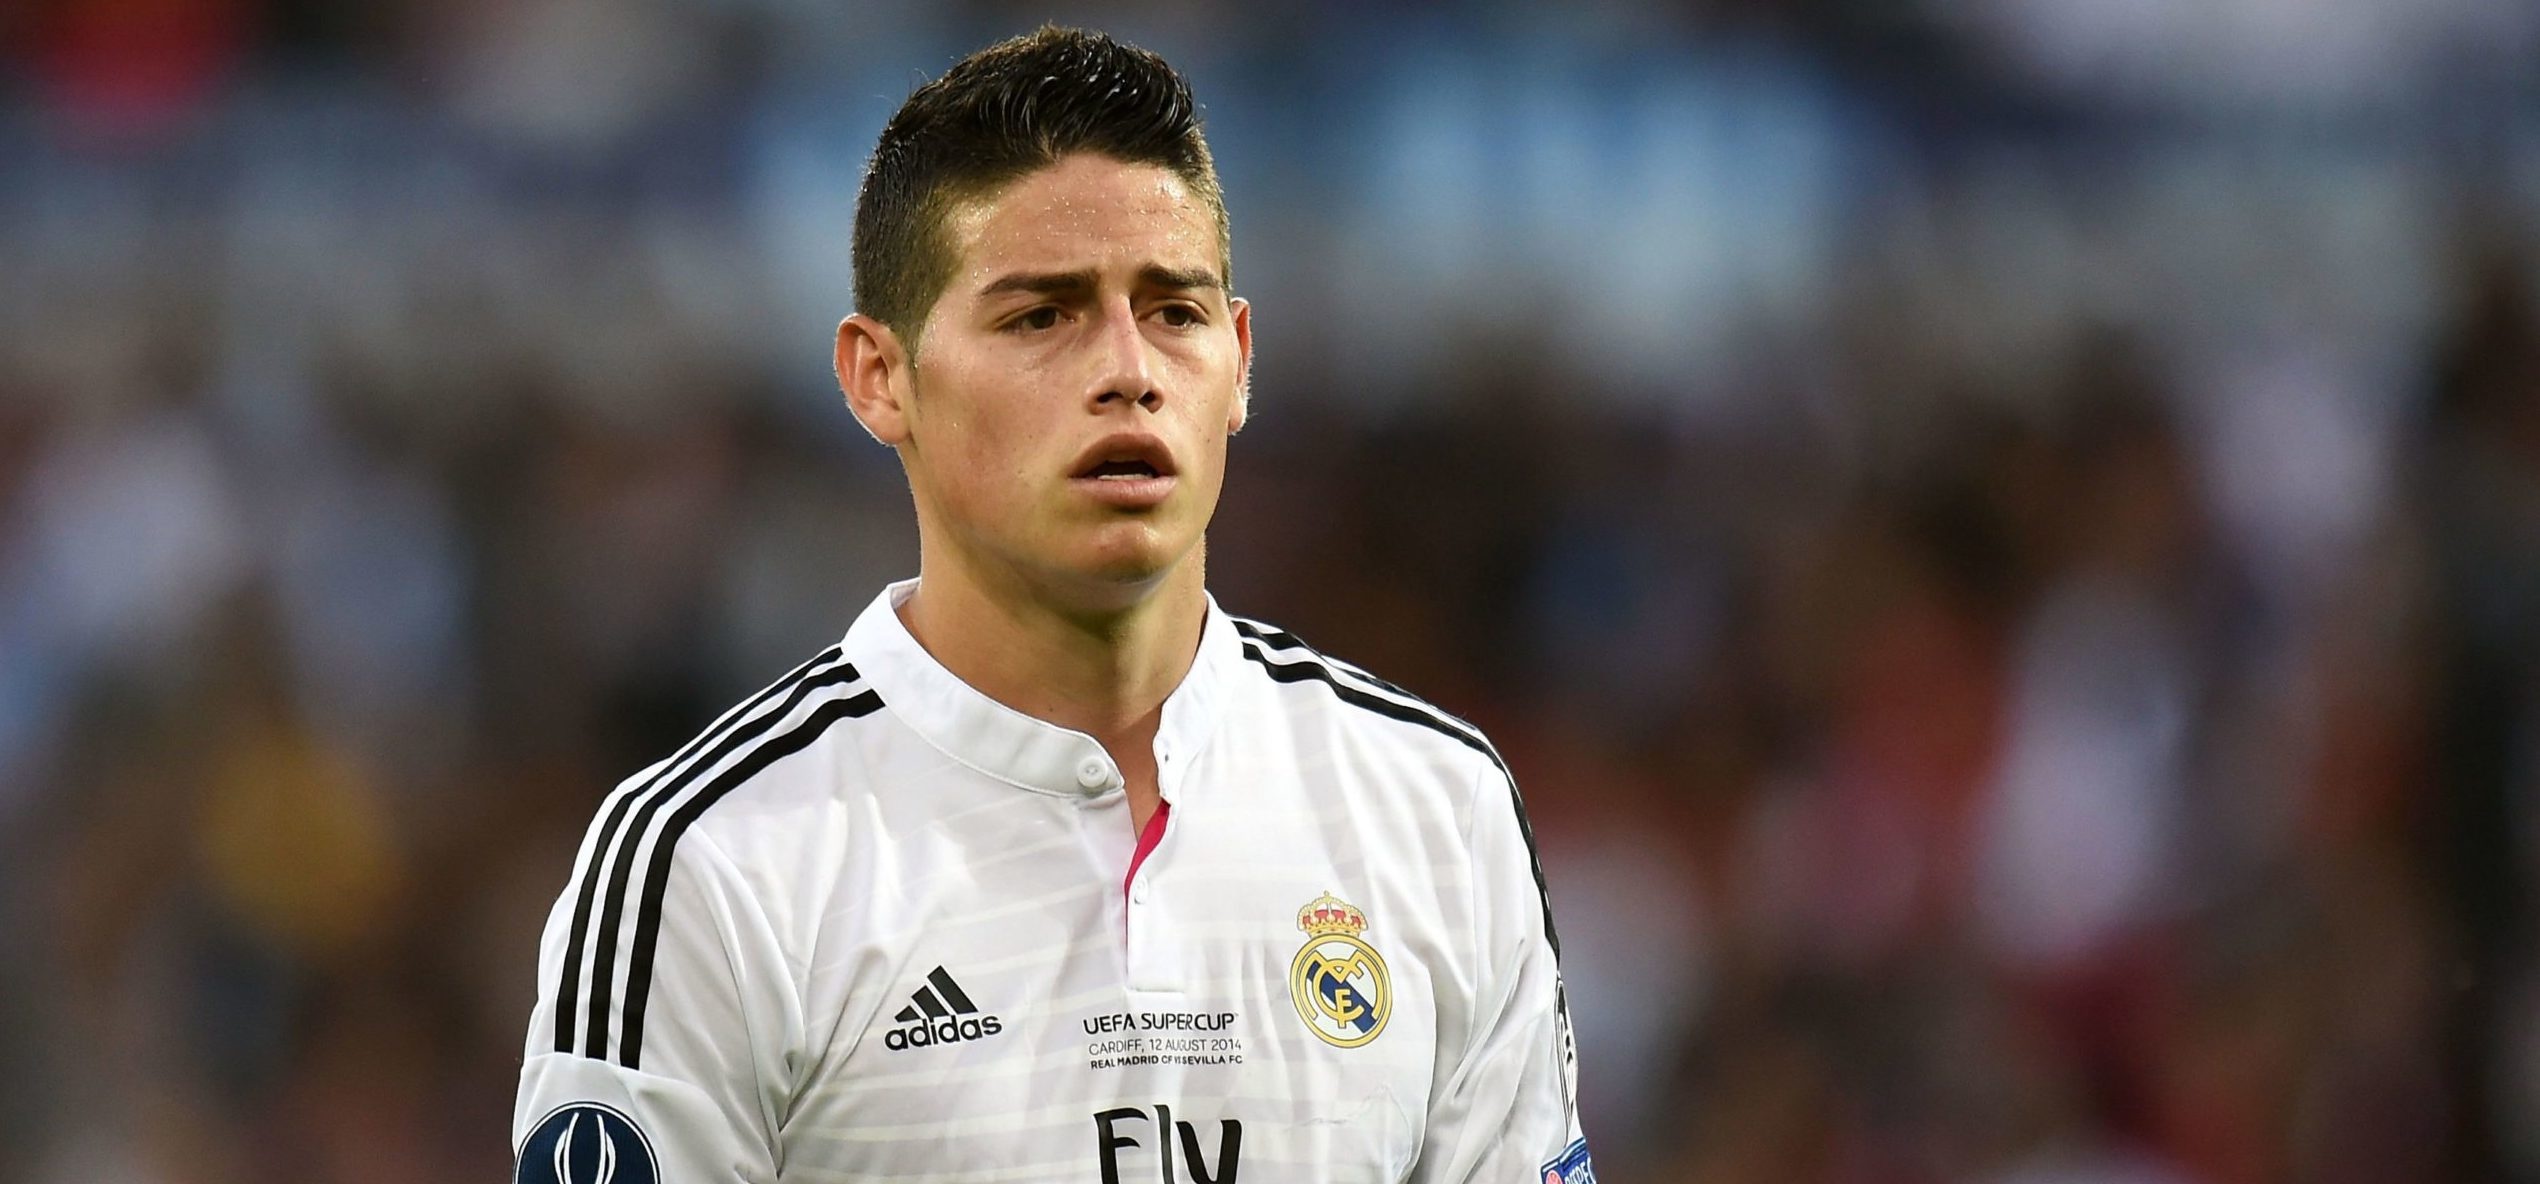 Real outcast, James Rodriguez, Red stripes, Reports, 2540x1190 Dual Screen Desktop